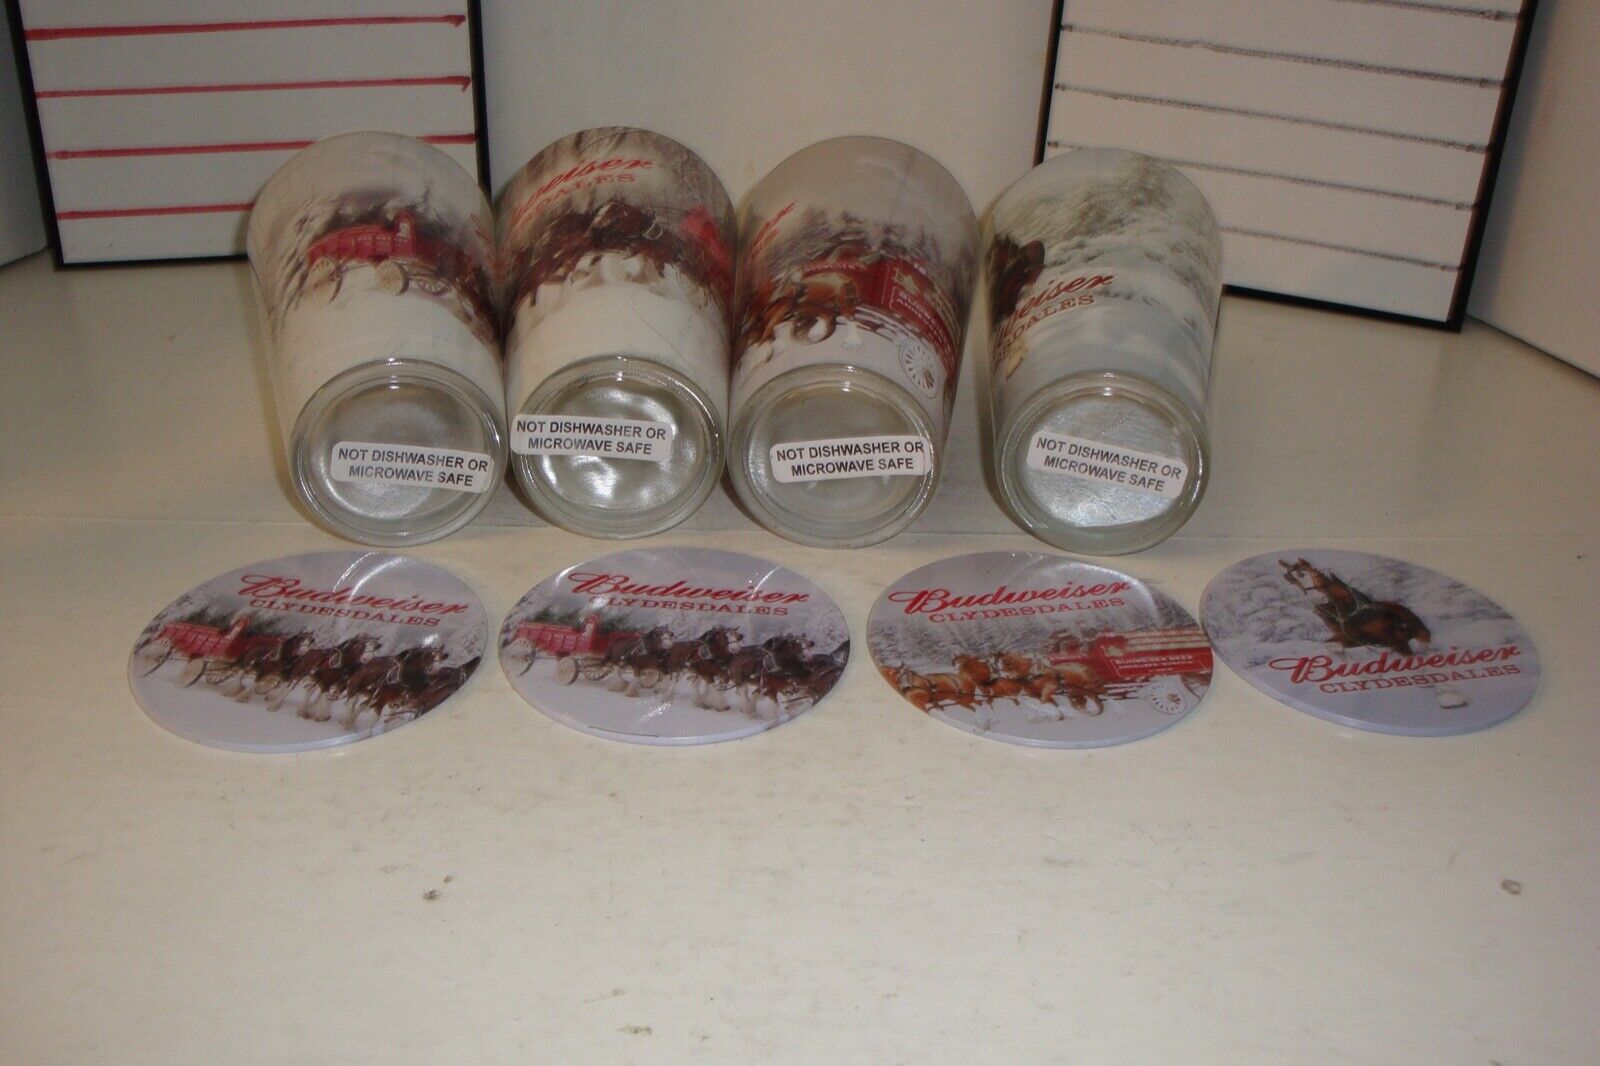 Vintage Budweiser Clydesdales pint beer glasses X 4 with Matching Coasters X 4 Budweiser - фотография #8